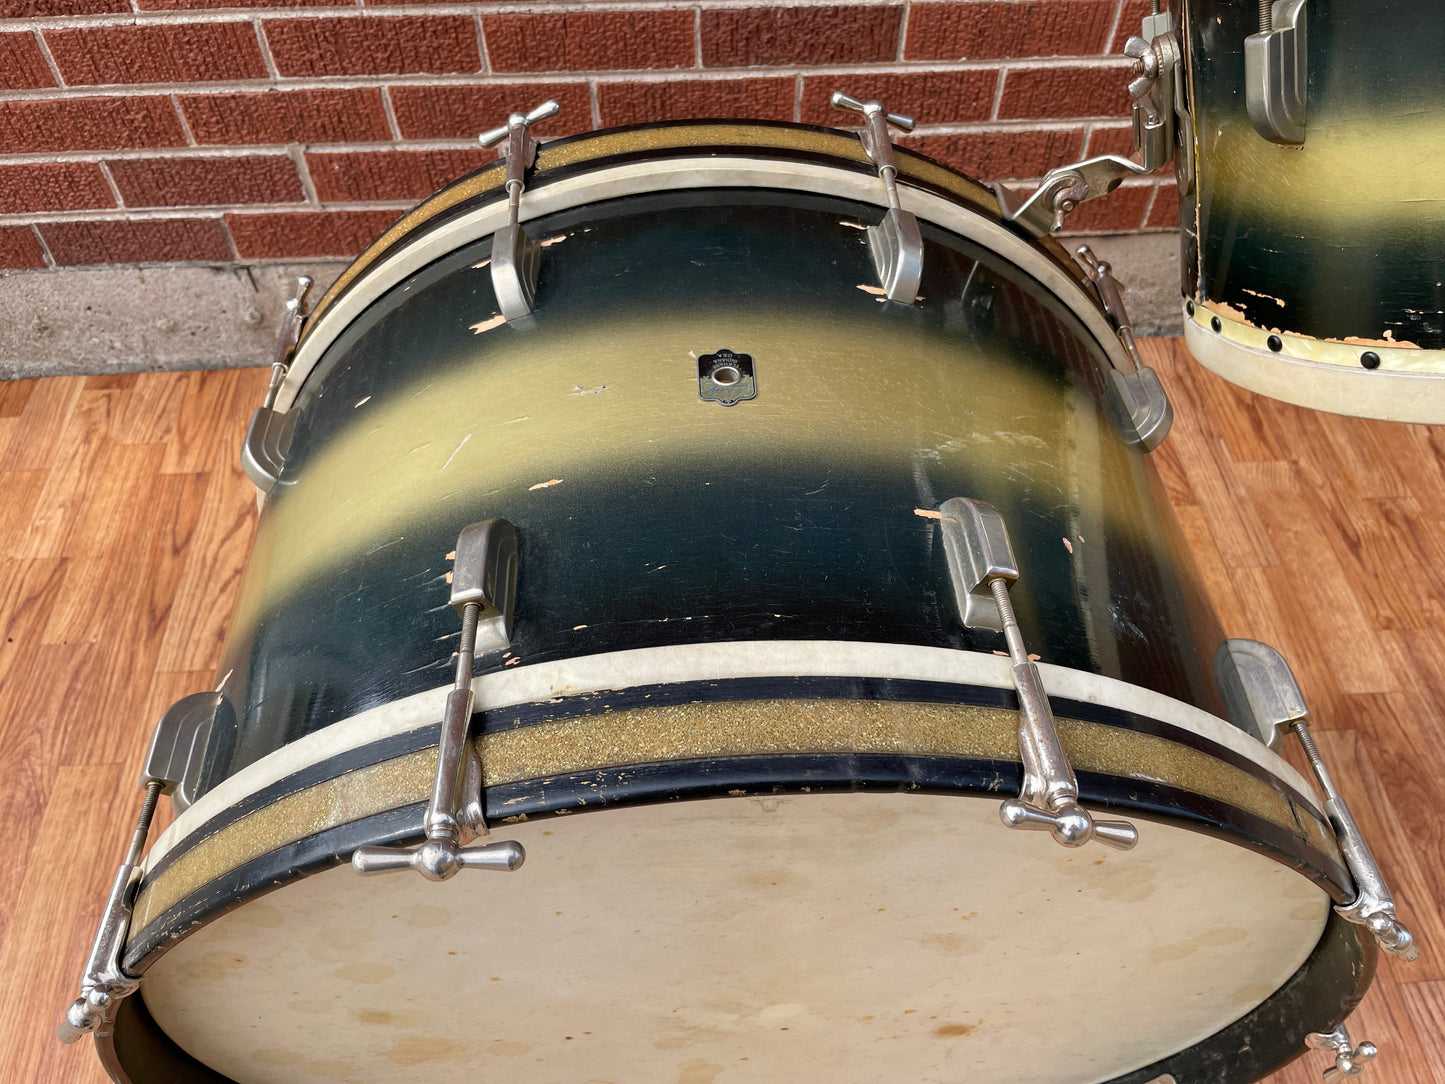 1948 Leedy Broadway Swingster Outfit Tom & Bass Drum Blue / Silver Duco 14x24/9x13